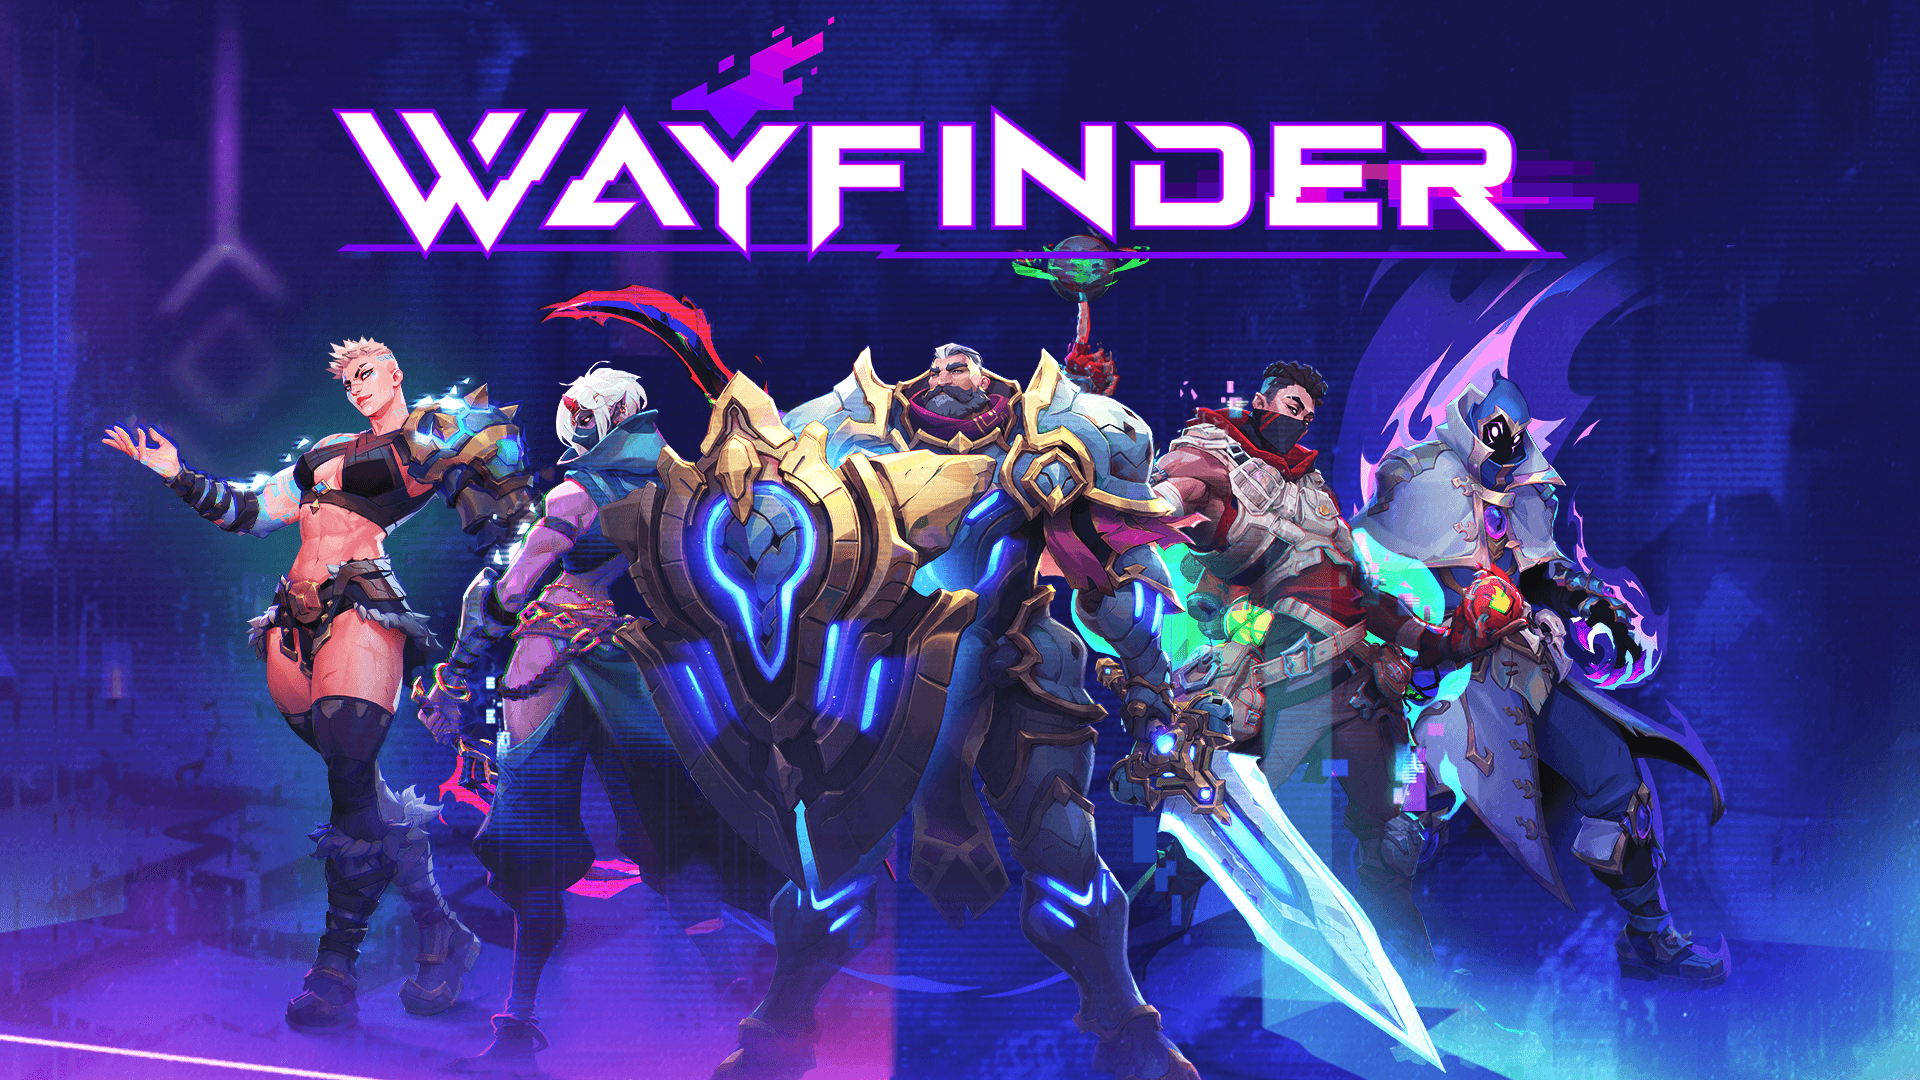 Wayfinder is a new characterdriven online RPG PlayStation.Blog